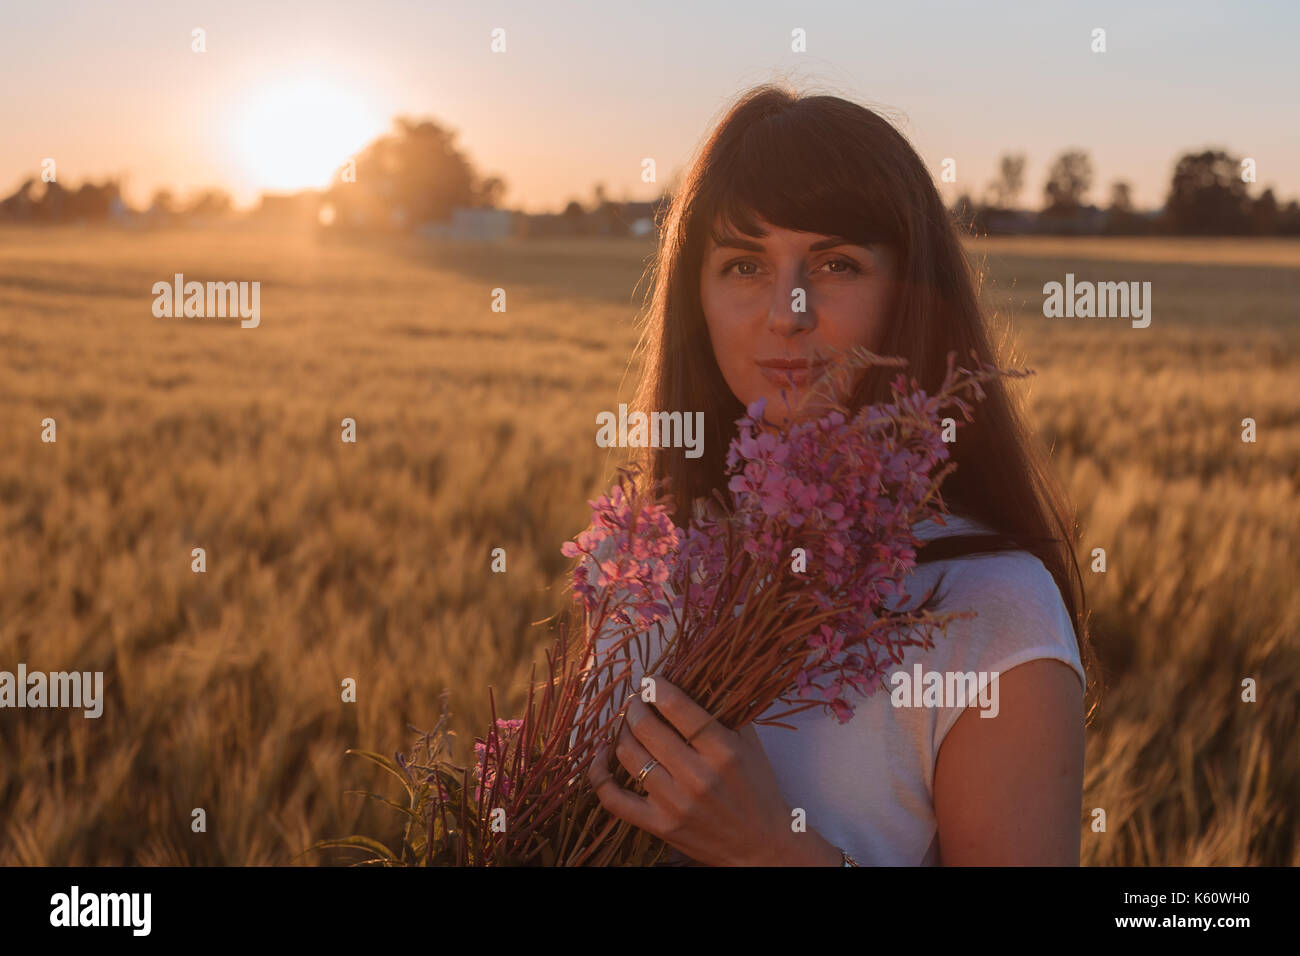 Beautiful girl in a field with flowers. Stock Photo